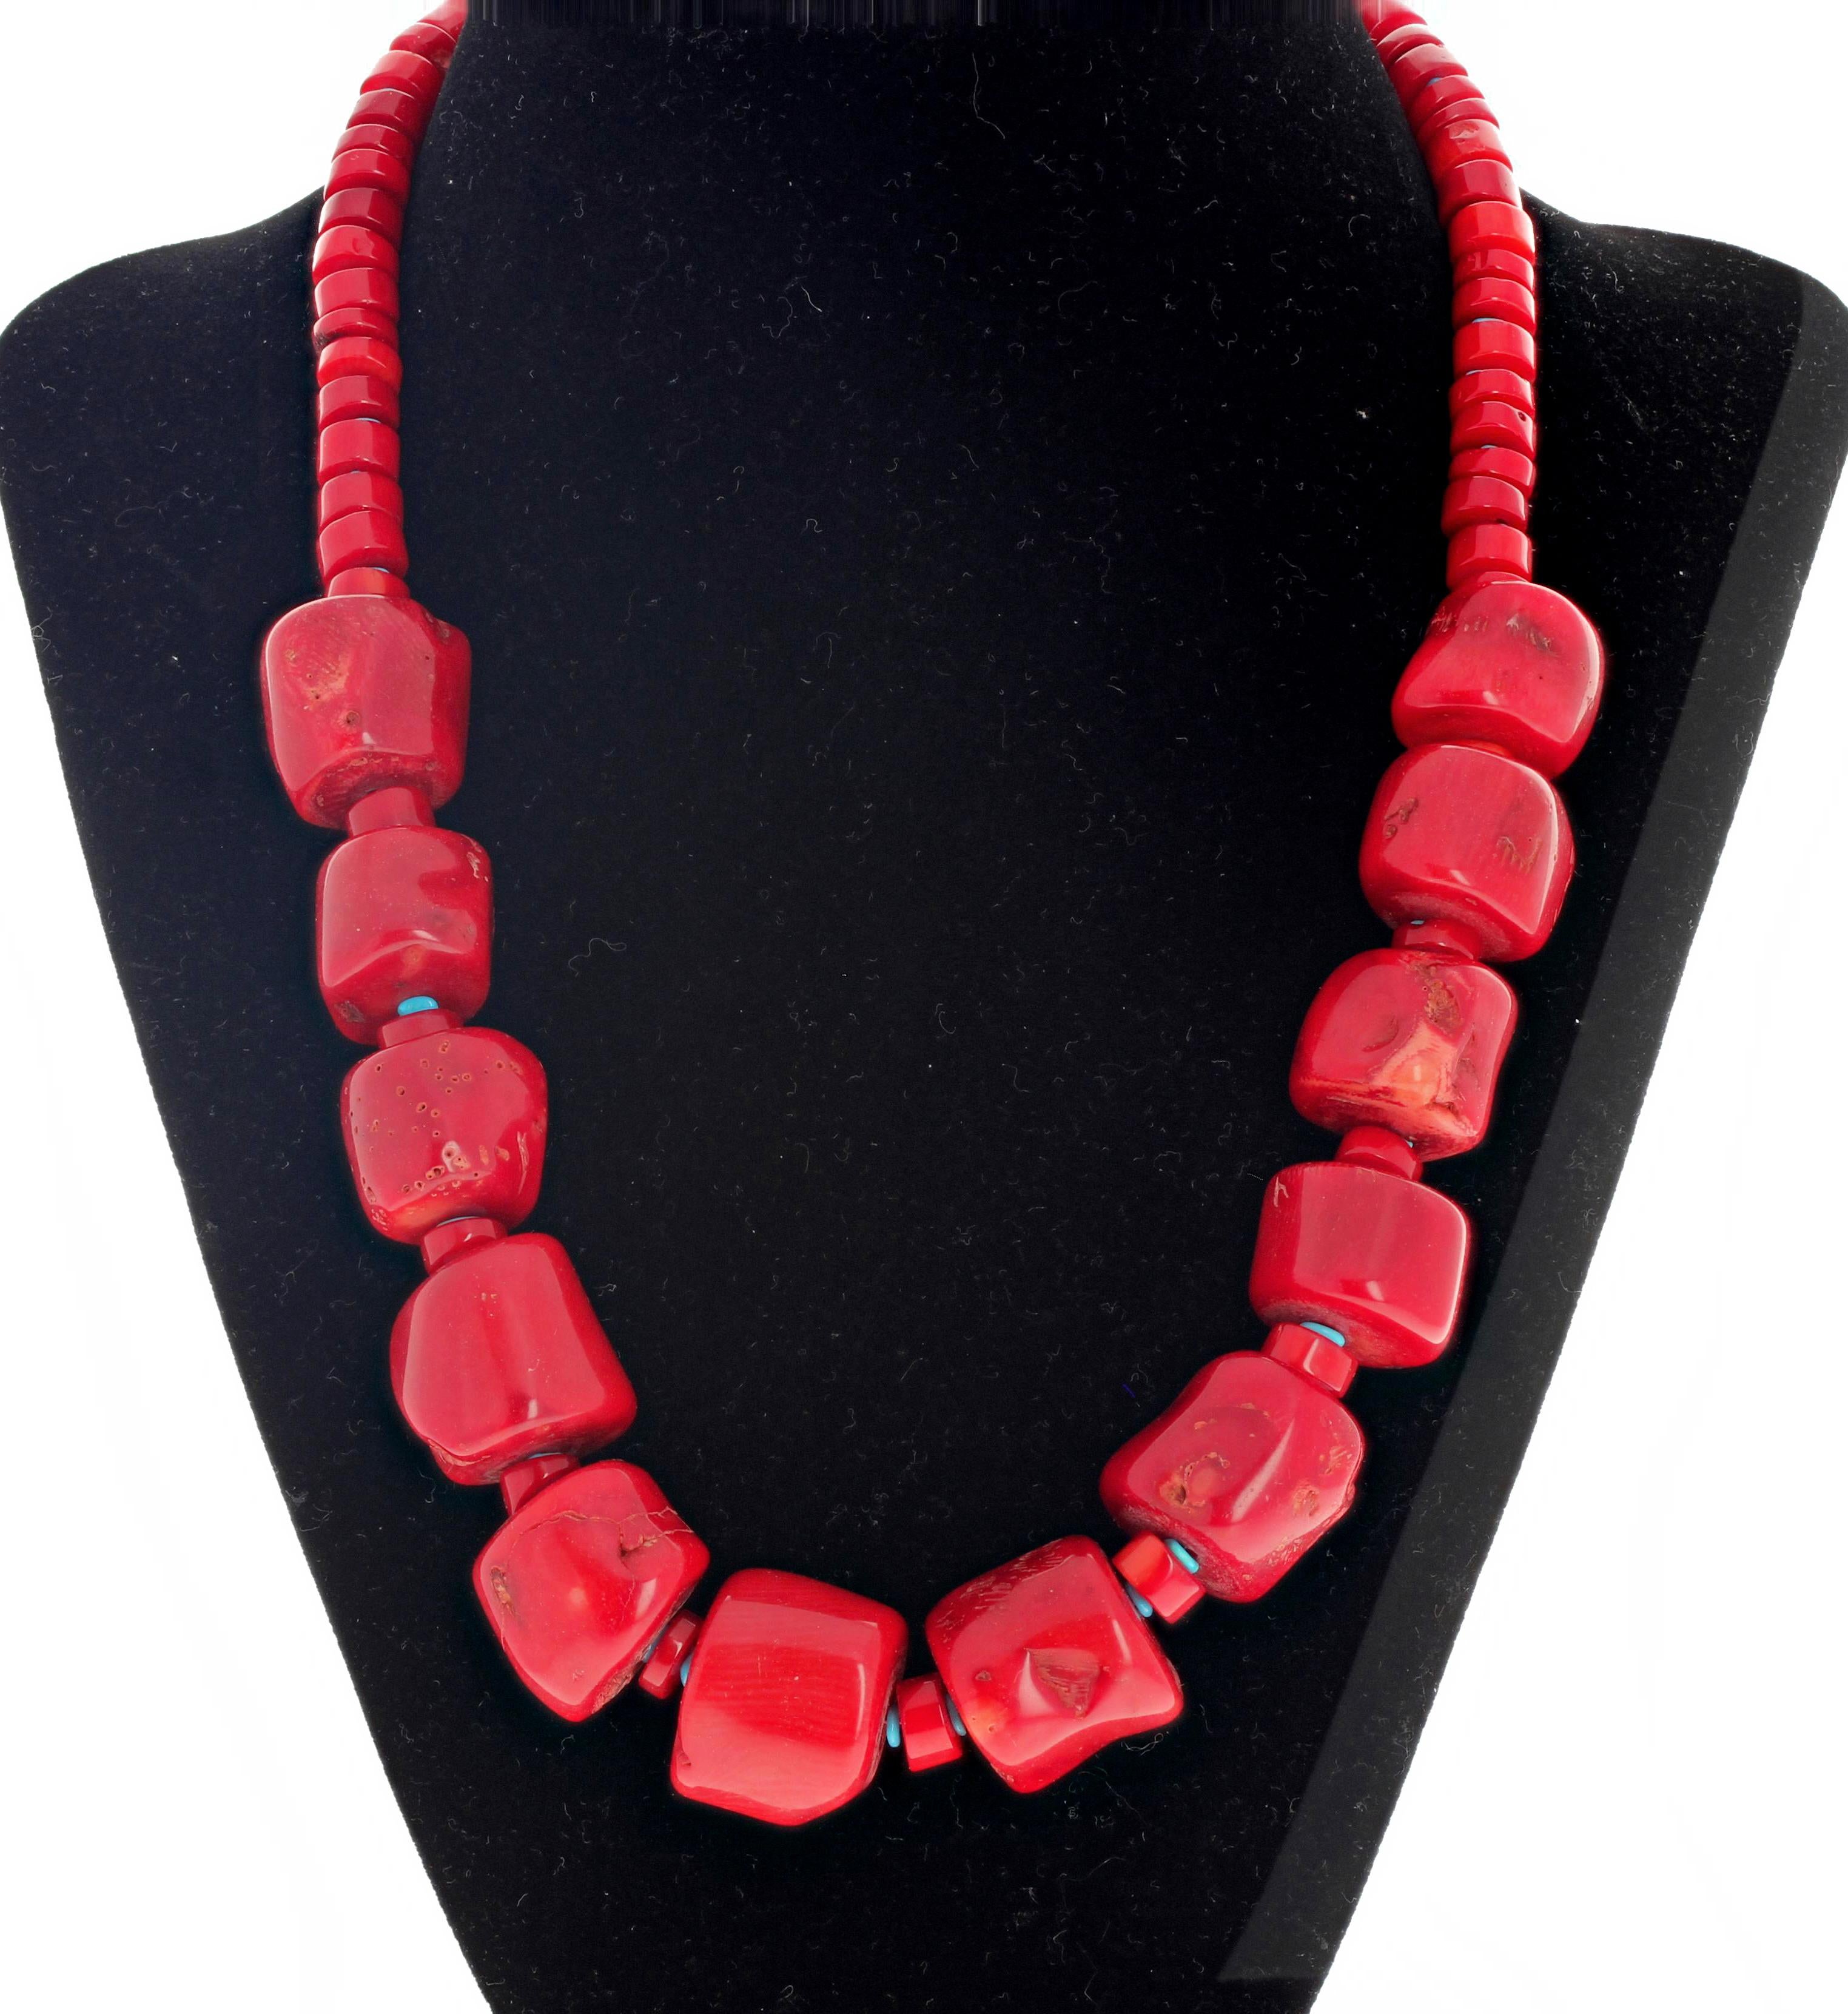 Beautiful red Bamboo Coral (15mm approximately) with blue Turquoise spacers compose this unique handmade necklace that is 20 inches long.  More from this seller by entering gemjunky in your 1stdibs search bar.